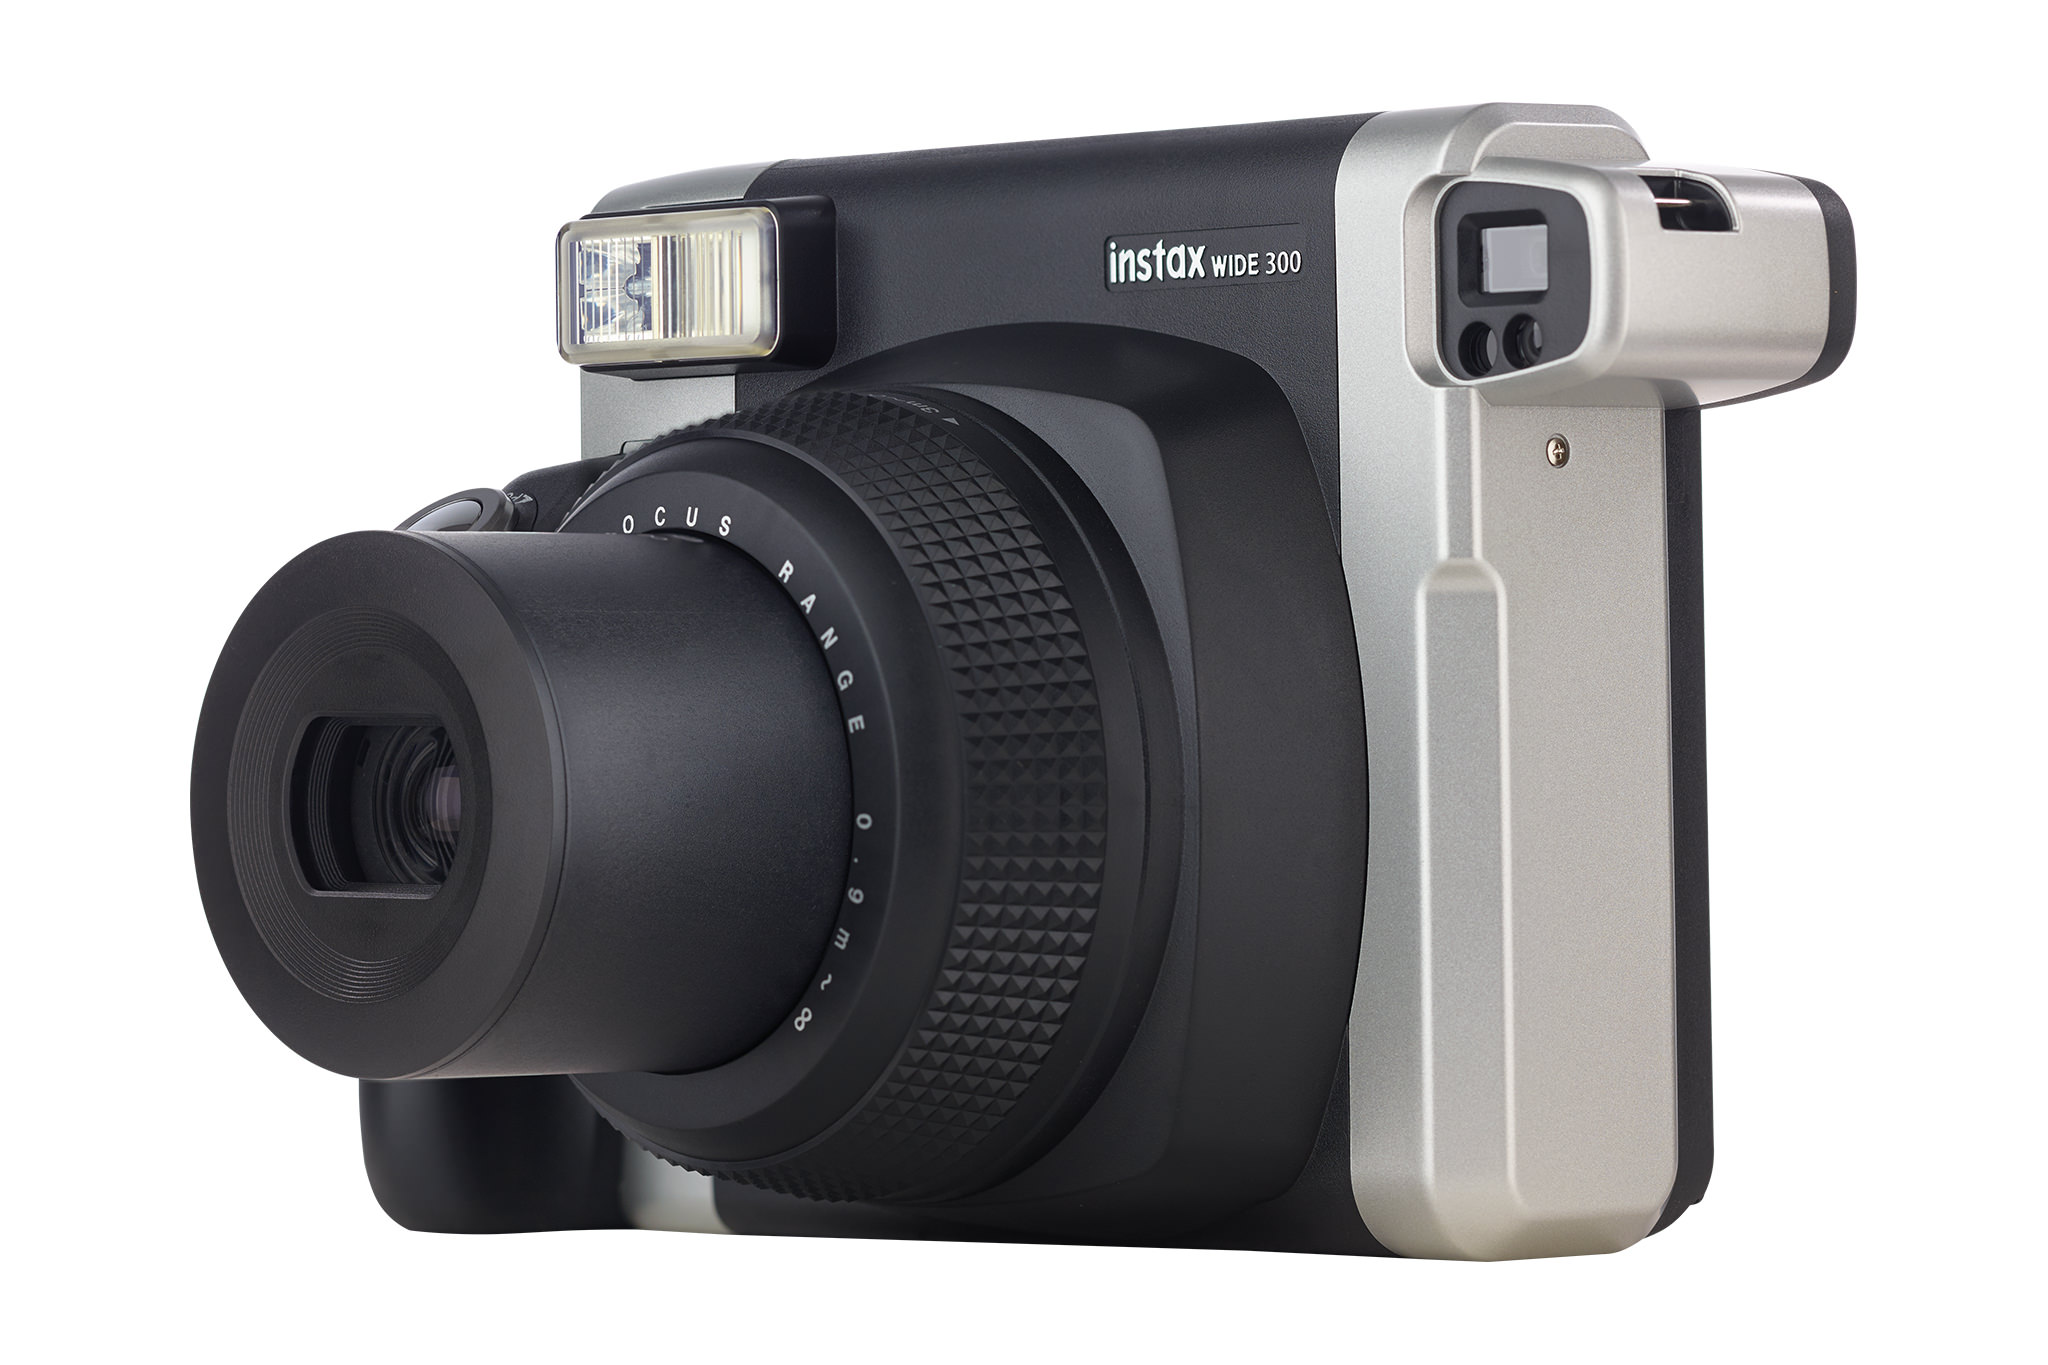 Fujifilm Instax Wide 300 - films functions of and the instant camera